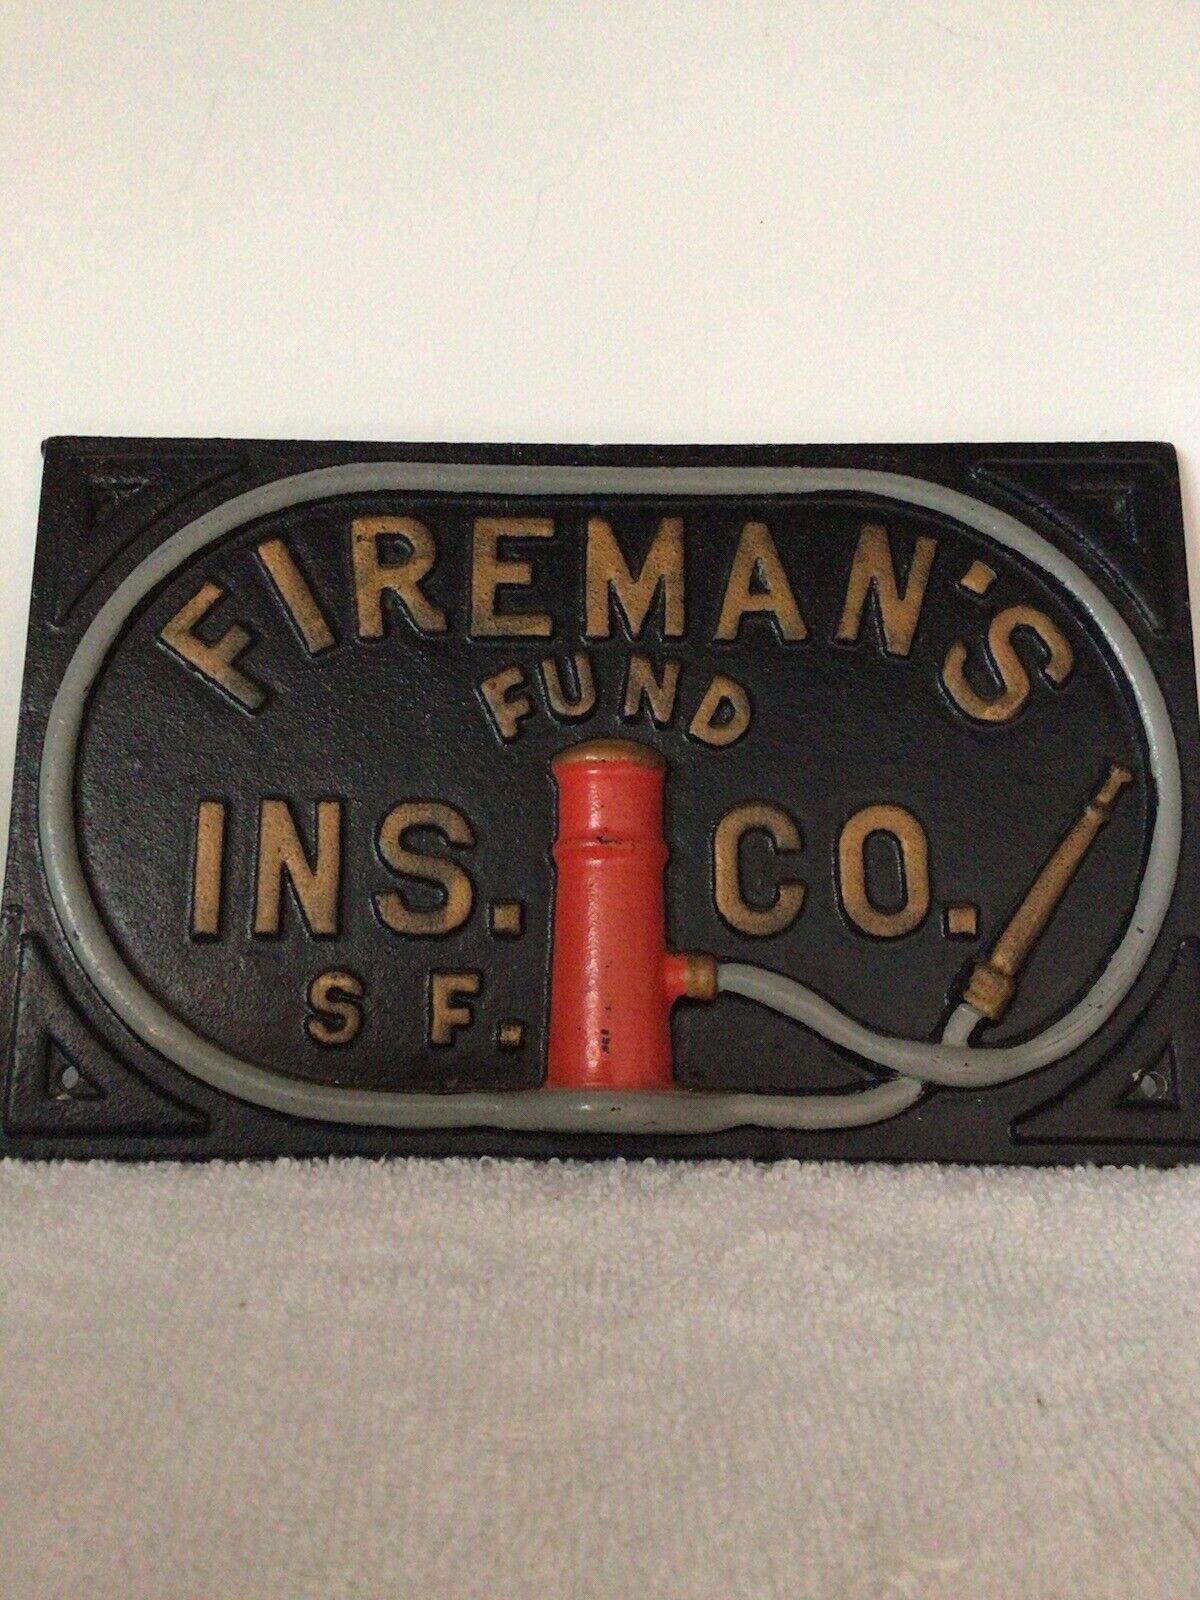 Fireman’s Fund Ins. Co. S.F. Cast Iron Sign